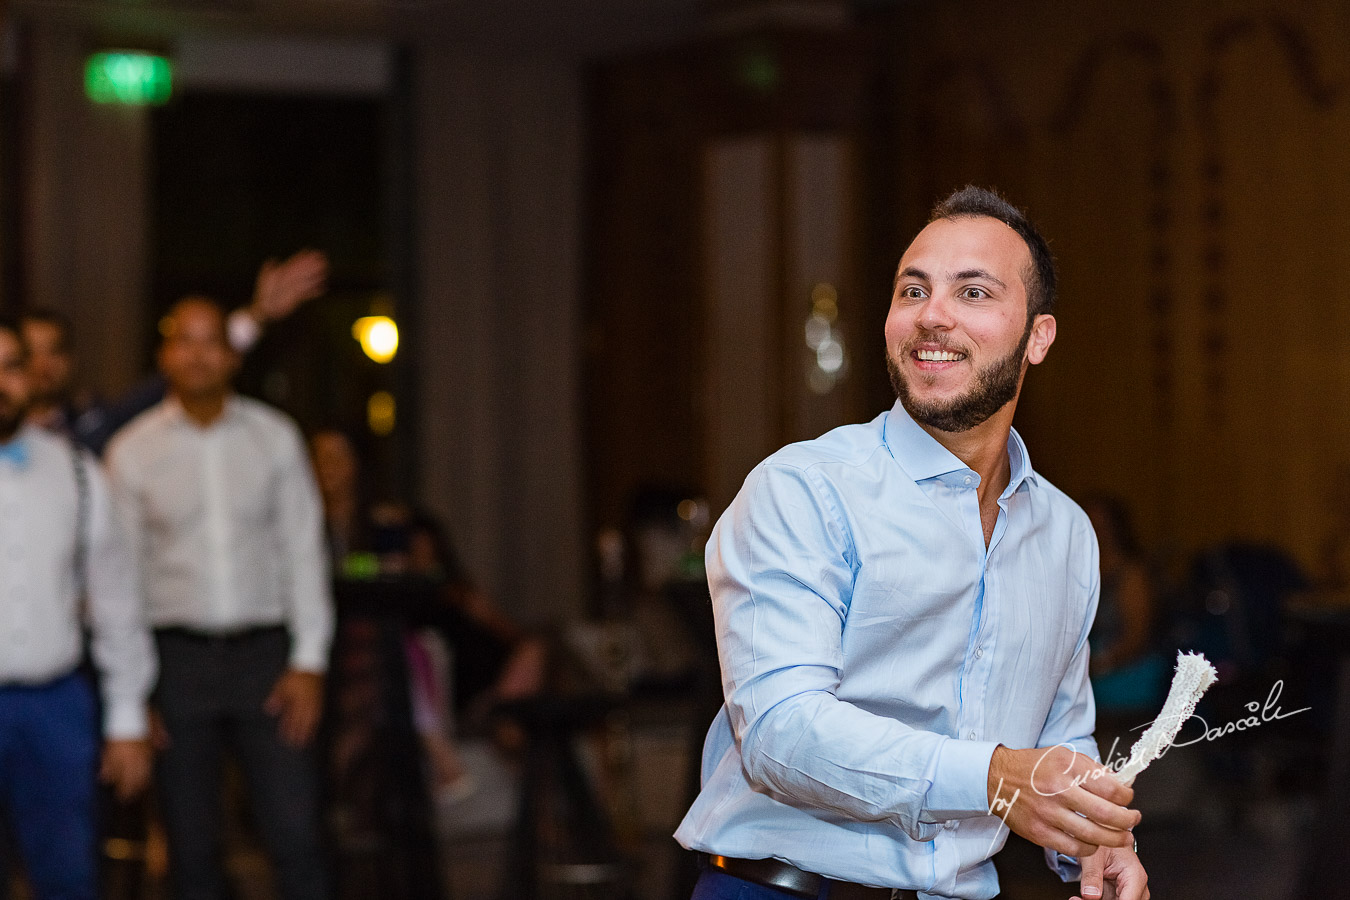 Moment when the groom is throwing the garter photographed as part of an Exclusive Wedding photography at Grand Resort Limassol, captured by Cyprus Wedding Photographer Cristian Dascalu.